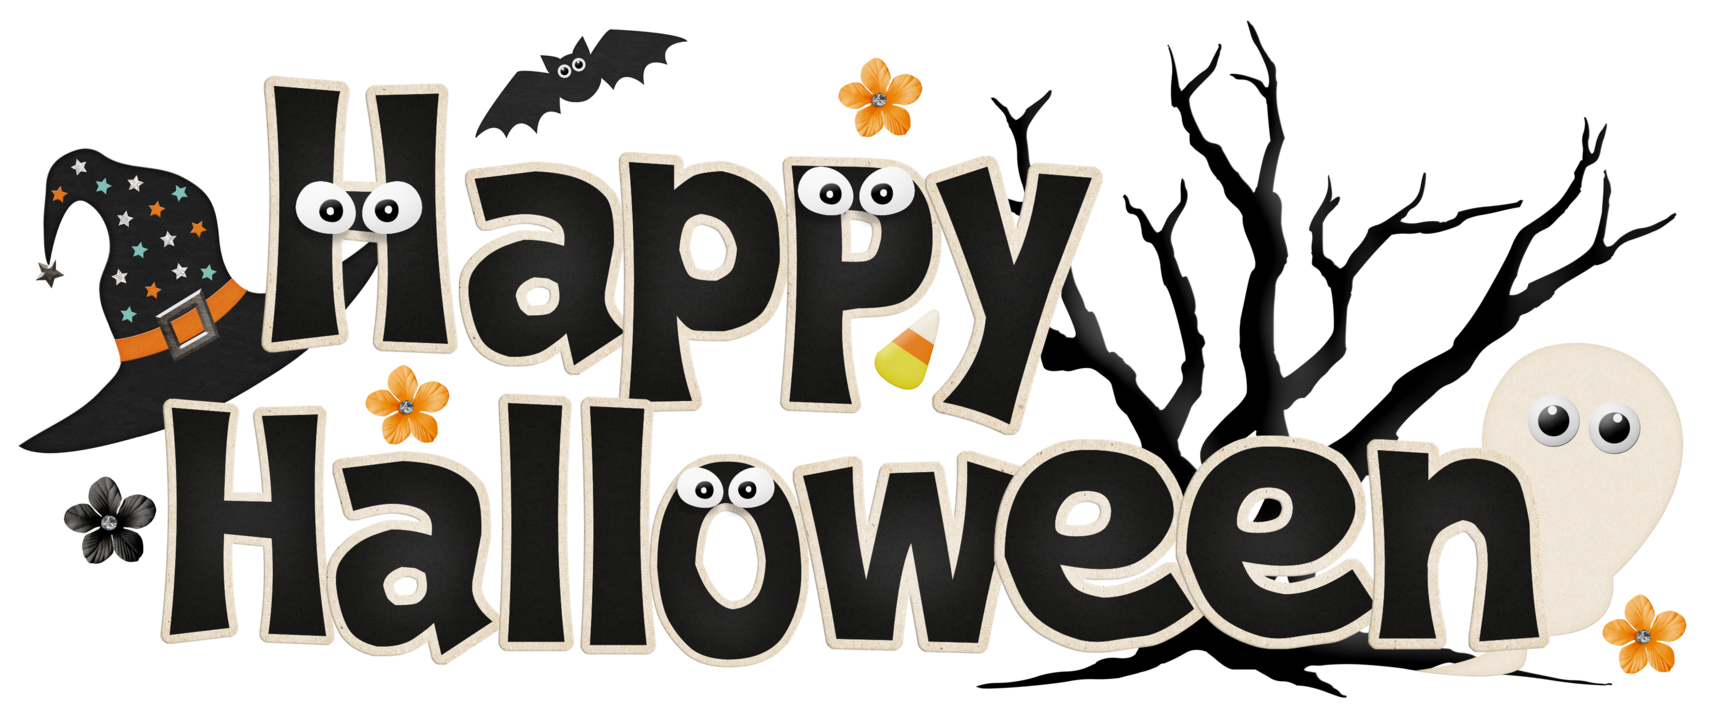 October Hd Image Clipart